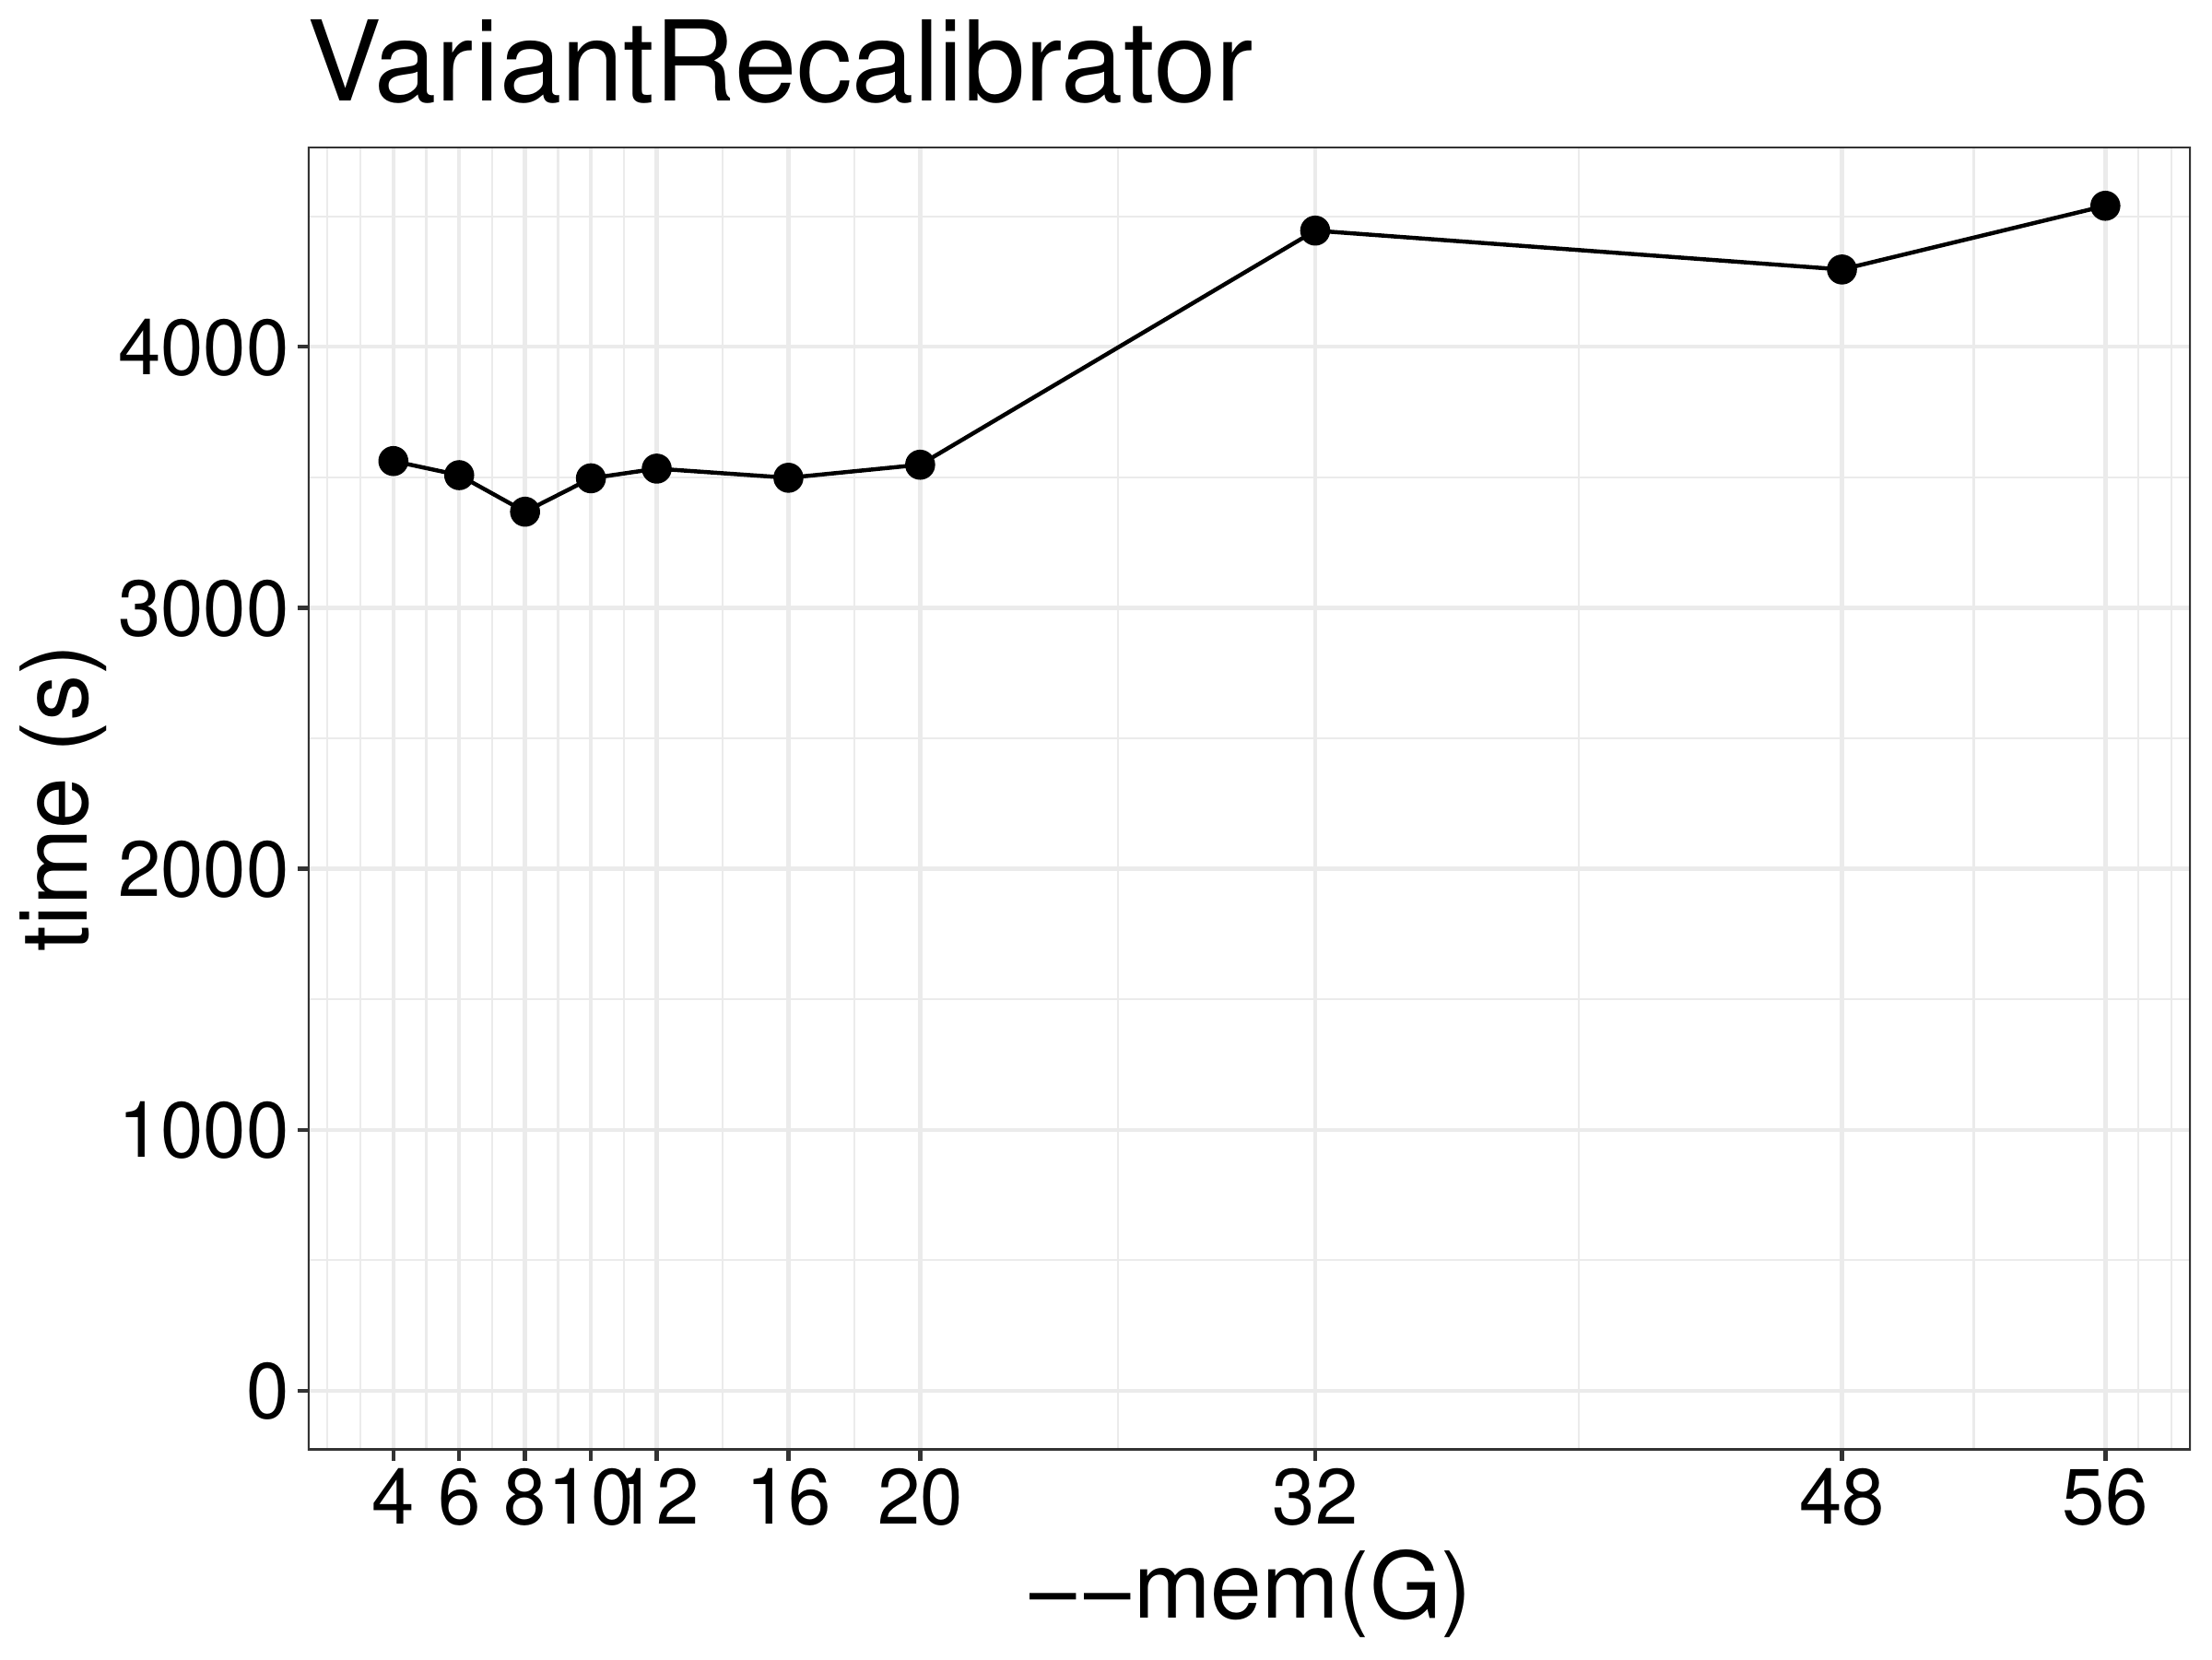 Runtime of VariantRecalibrator as a function of memory